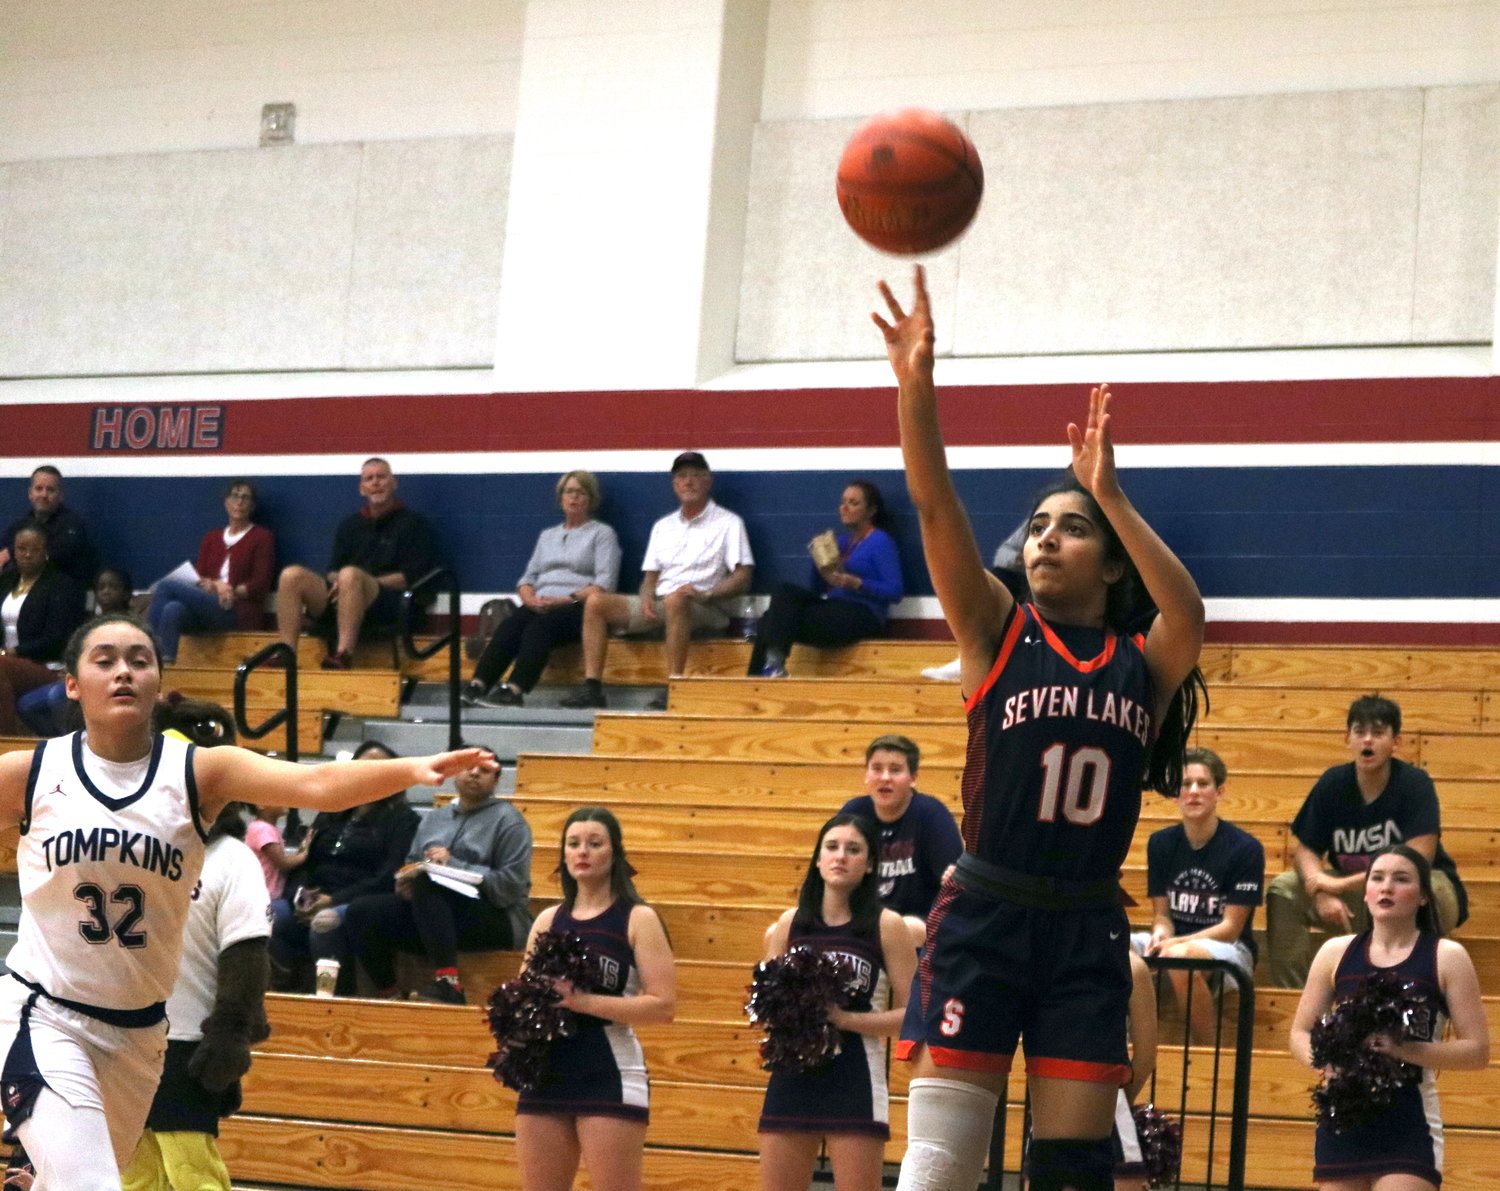 Shreya Jategaonkar shoots during Tuesday’s District 19-6A game between Tompkins and Seven Lakes at the Tompkins gym.